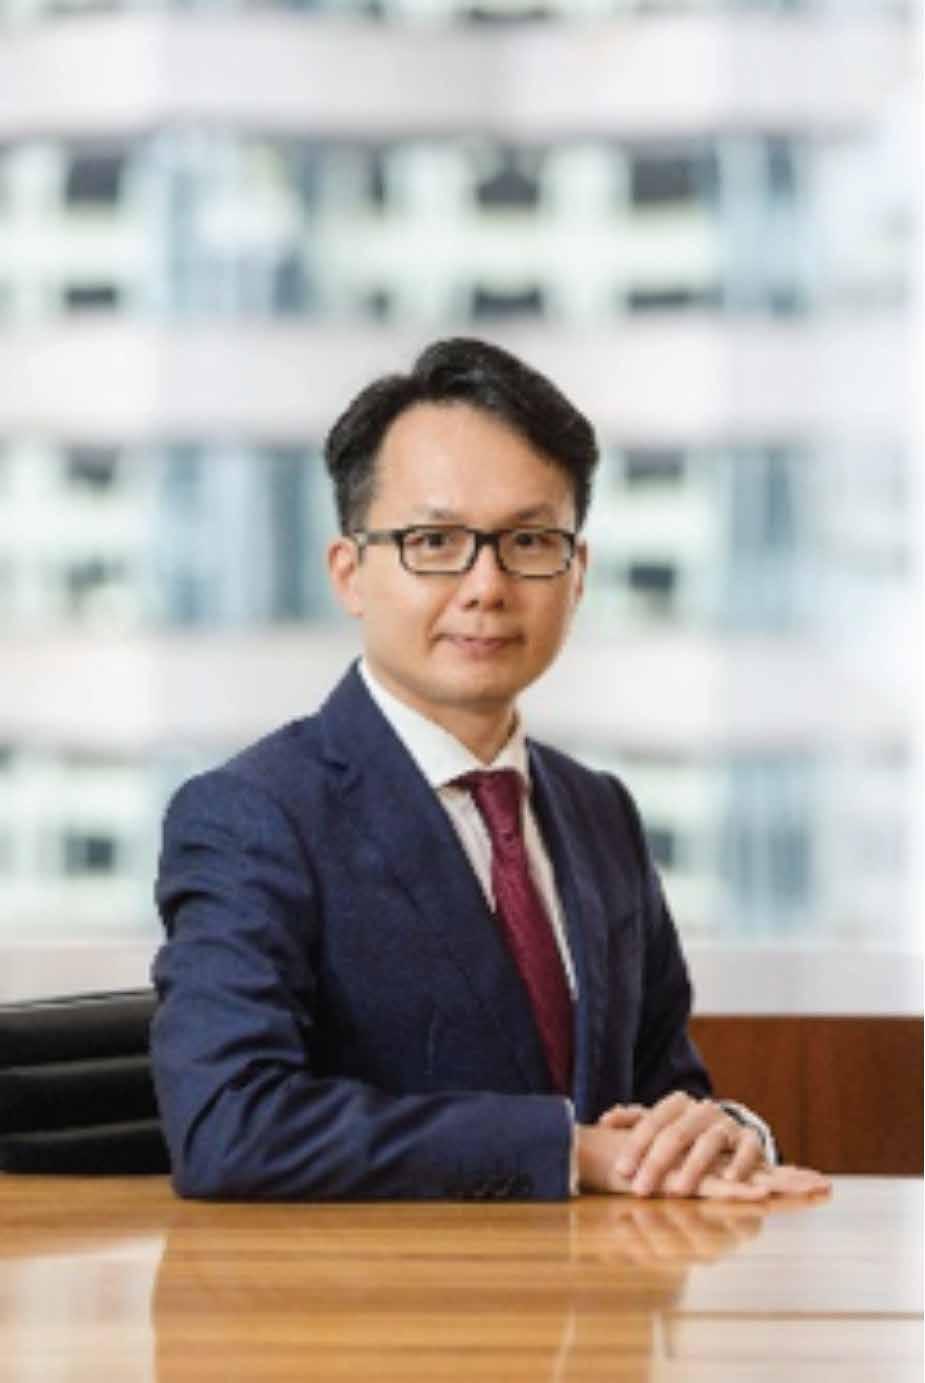 Most recently, he was a Statutory Executive Officer, Senior Vice President and Chief Auditor for MetLife Alico Insurance K.K. Japan. He also led the audit departments at J.P. Morgan Asia Pacific; Shinsei Bank; Morgan Stanley Japan; and Deutsche Bank Japan.